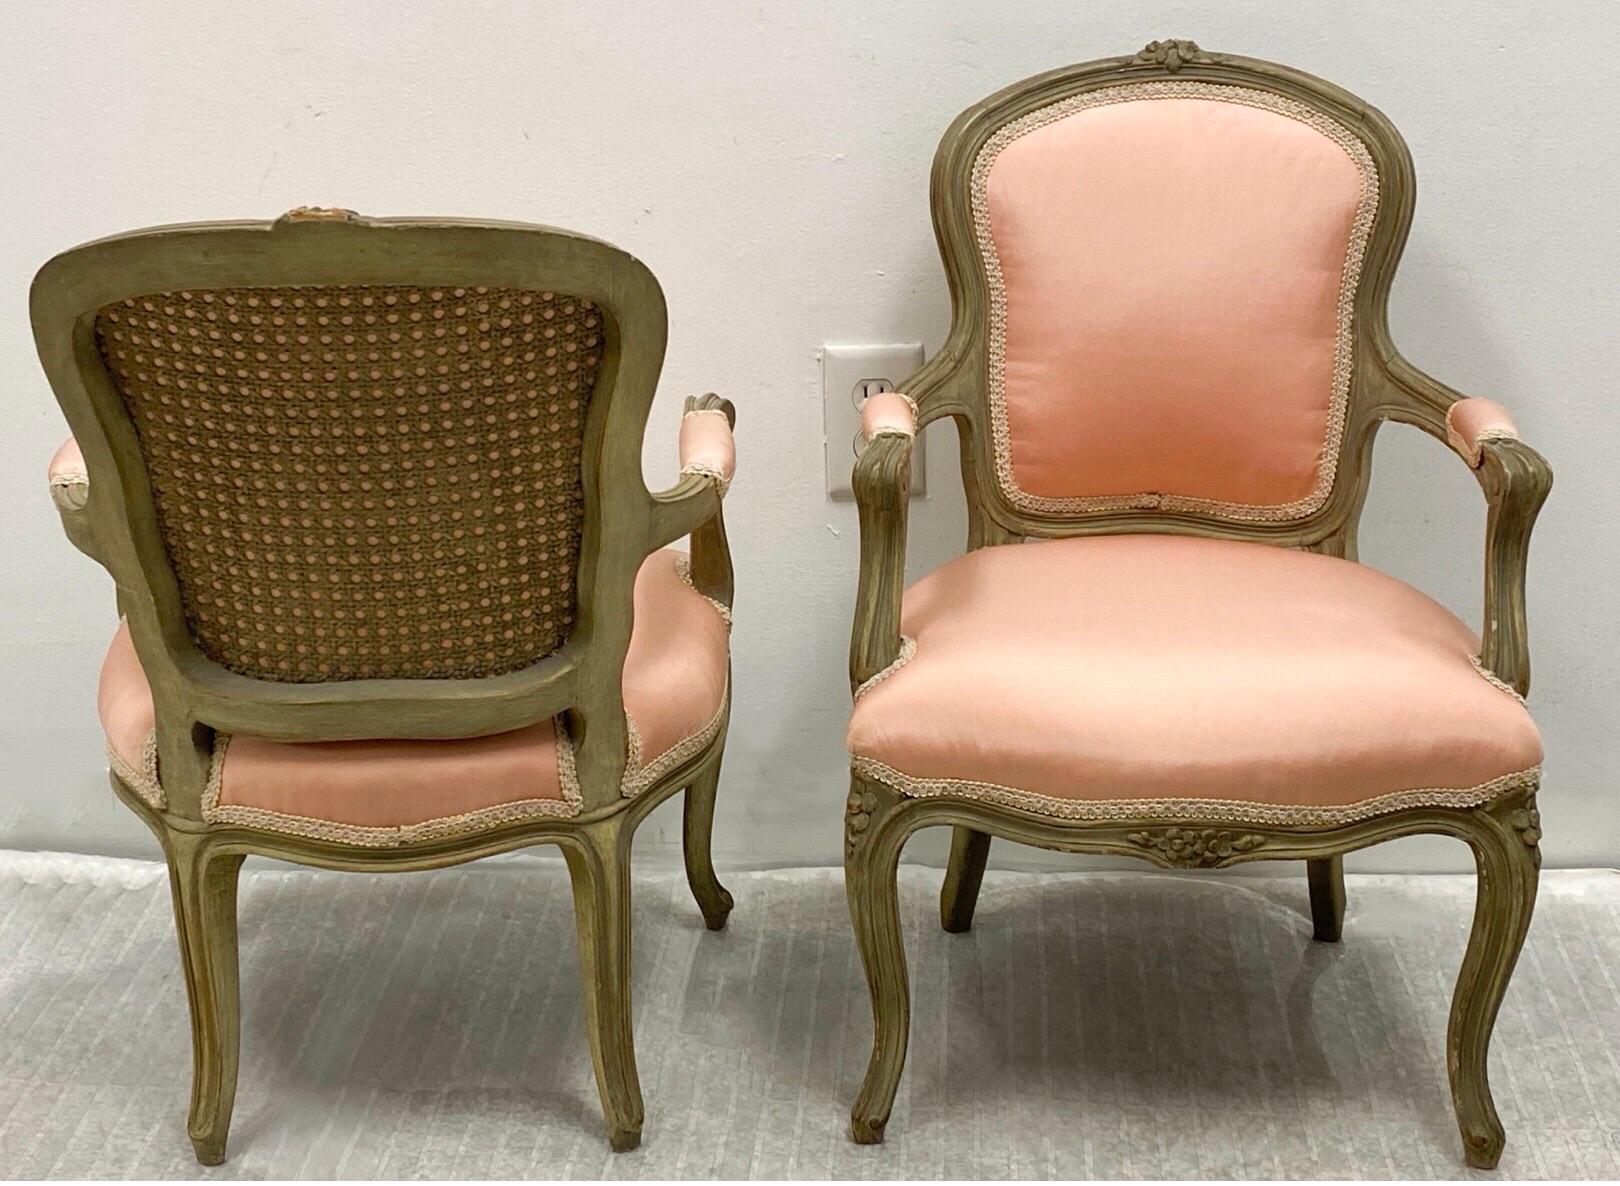 This is a whimsical pair of French children’s bergere chairs. The frame is a French gray, and the vintage upholstery appears to be a pink silk or taffeta. They are in very good condition. They most likely date to the 40’s.